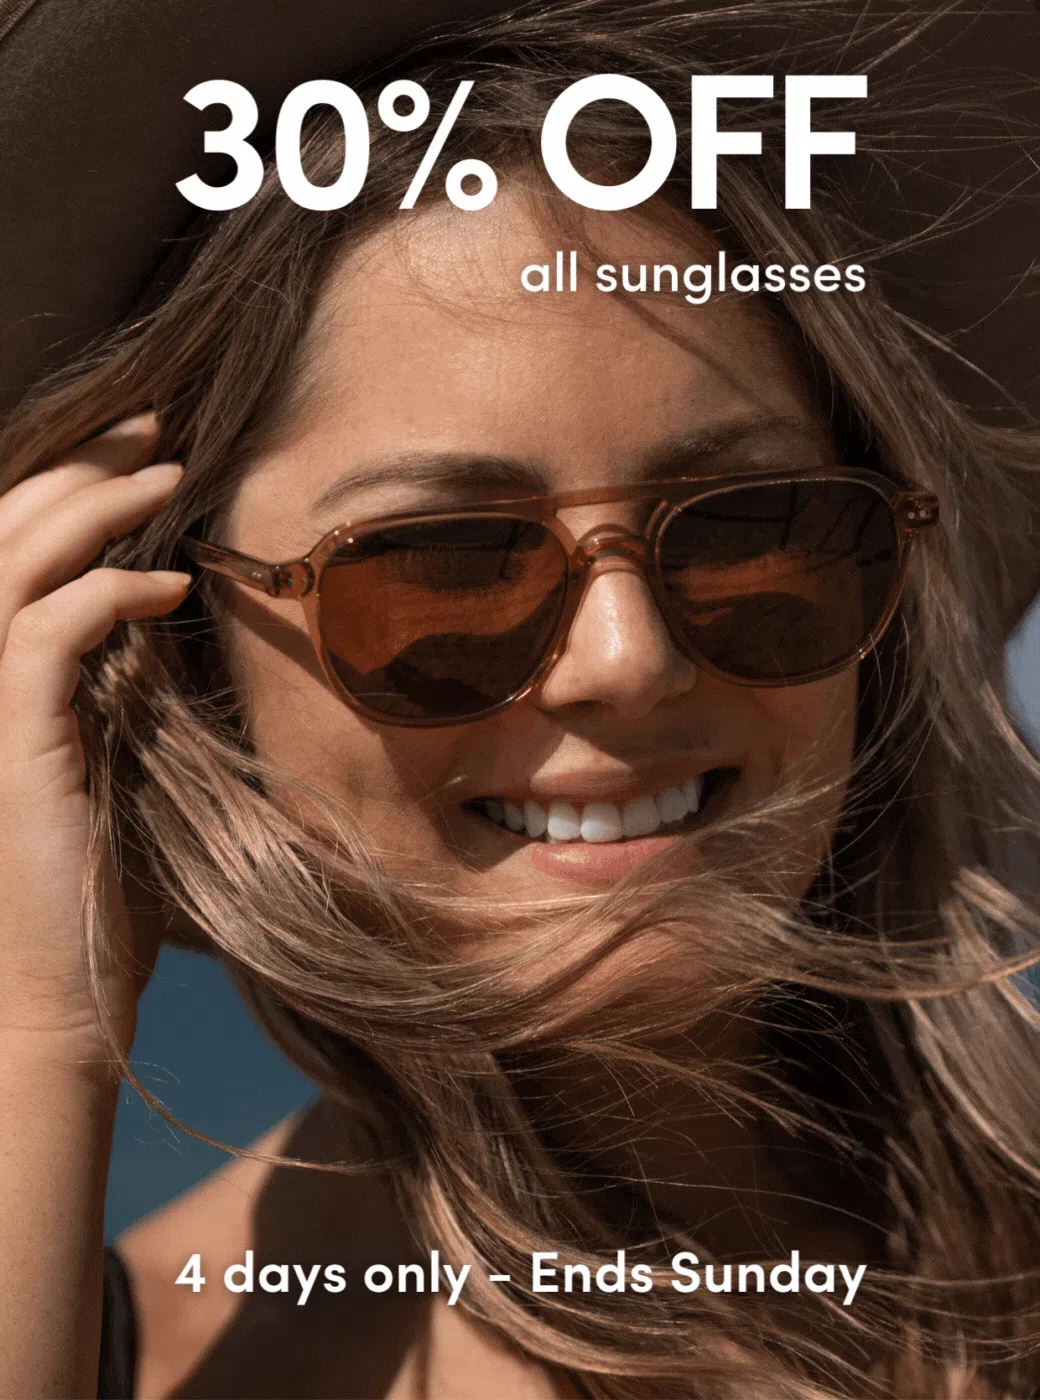 Baxter Blue sale: Extra 30% OFF all sunglasses with coupon